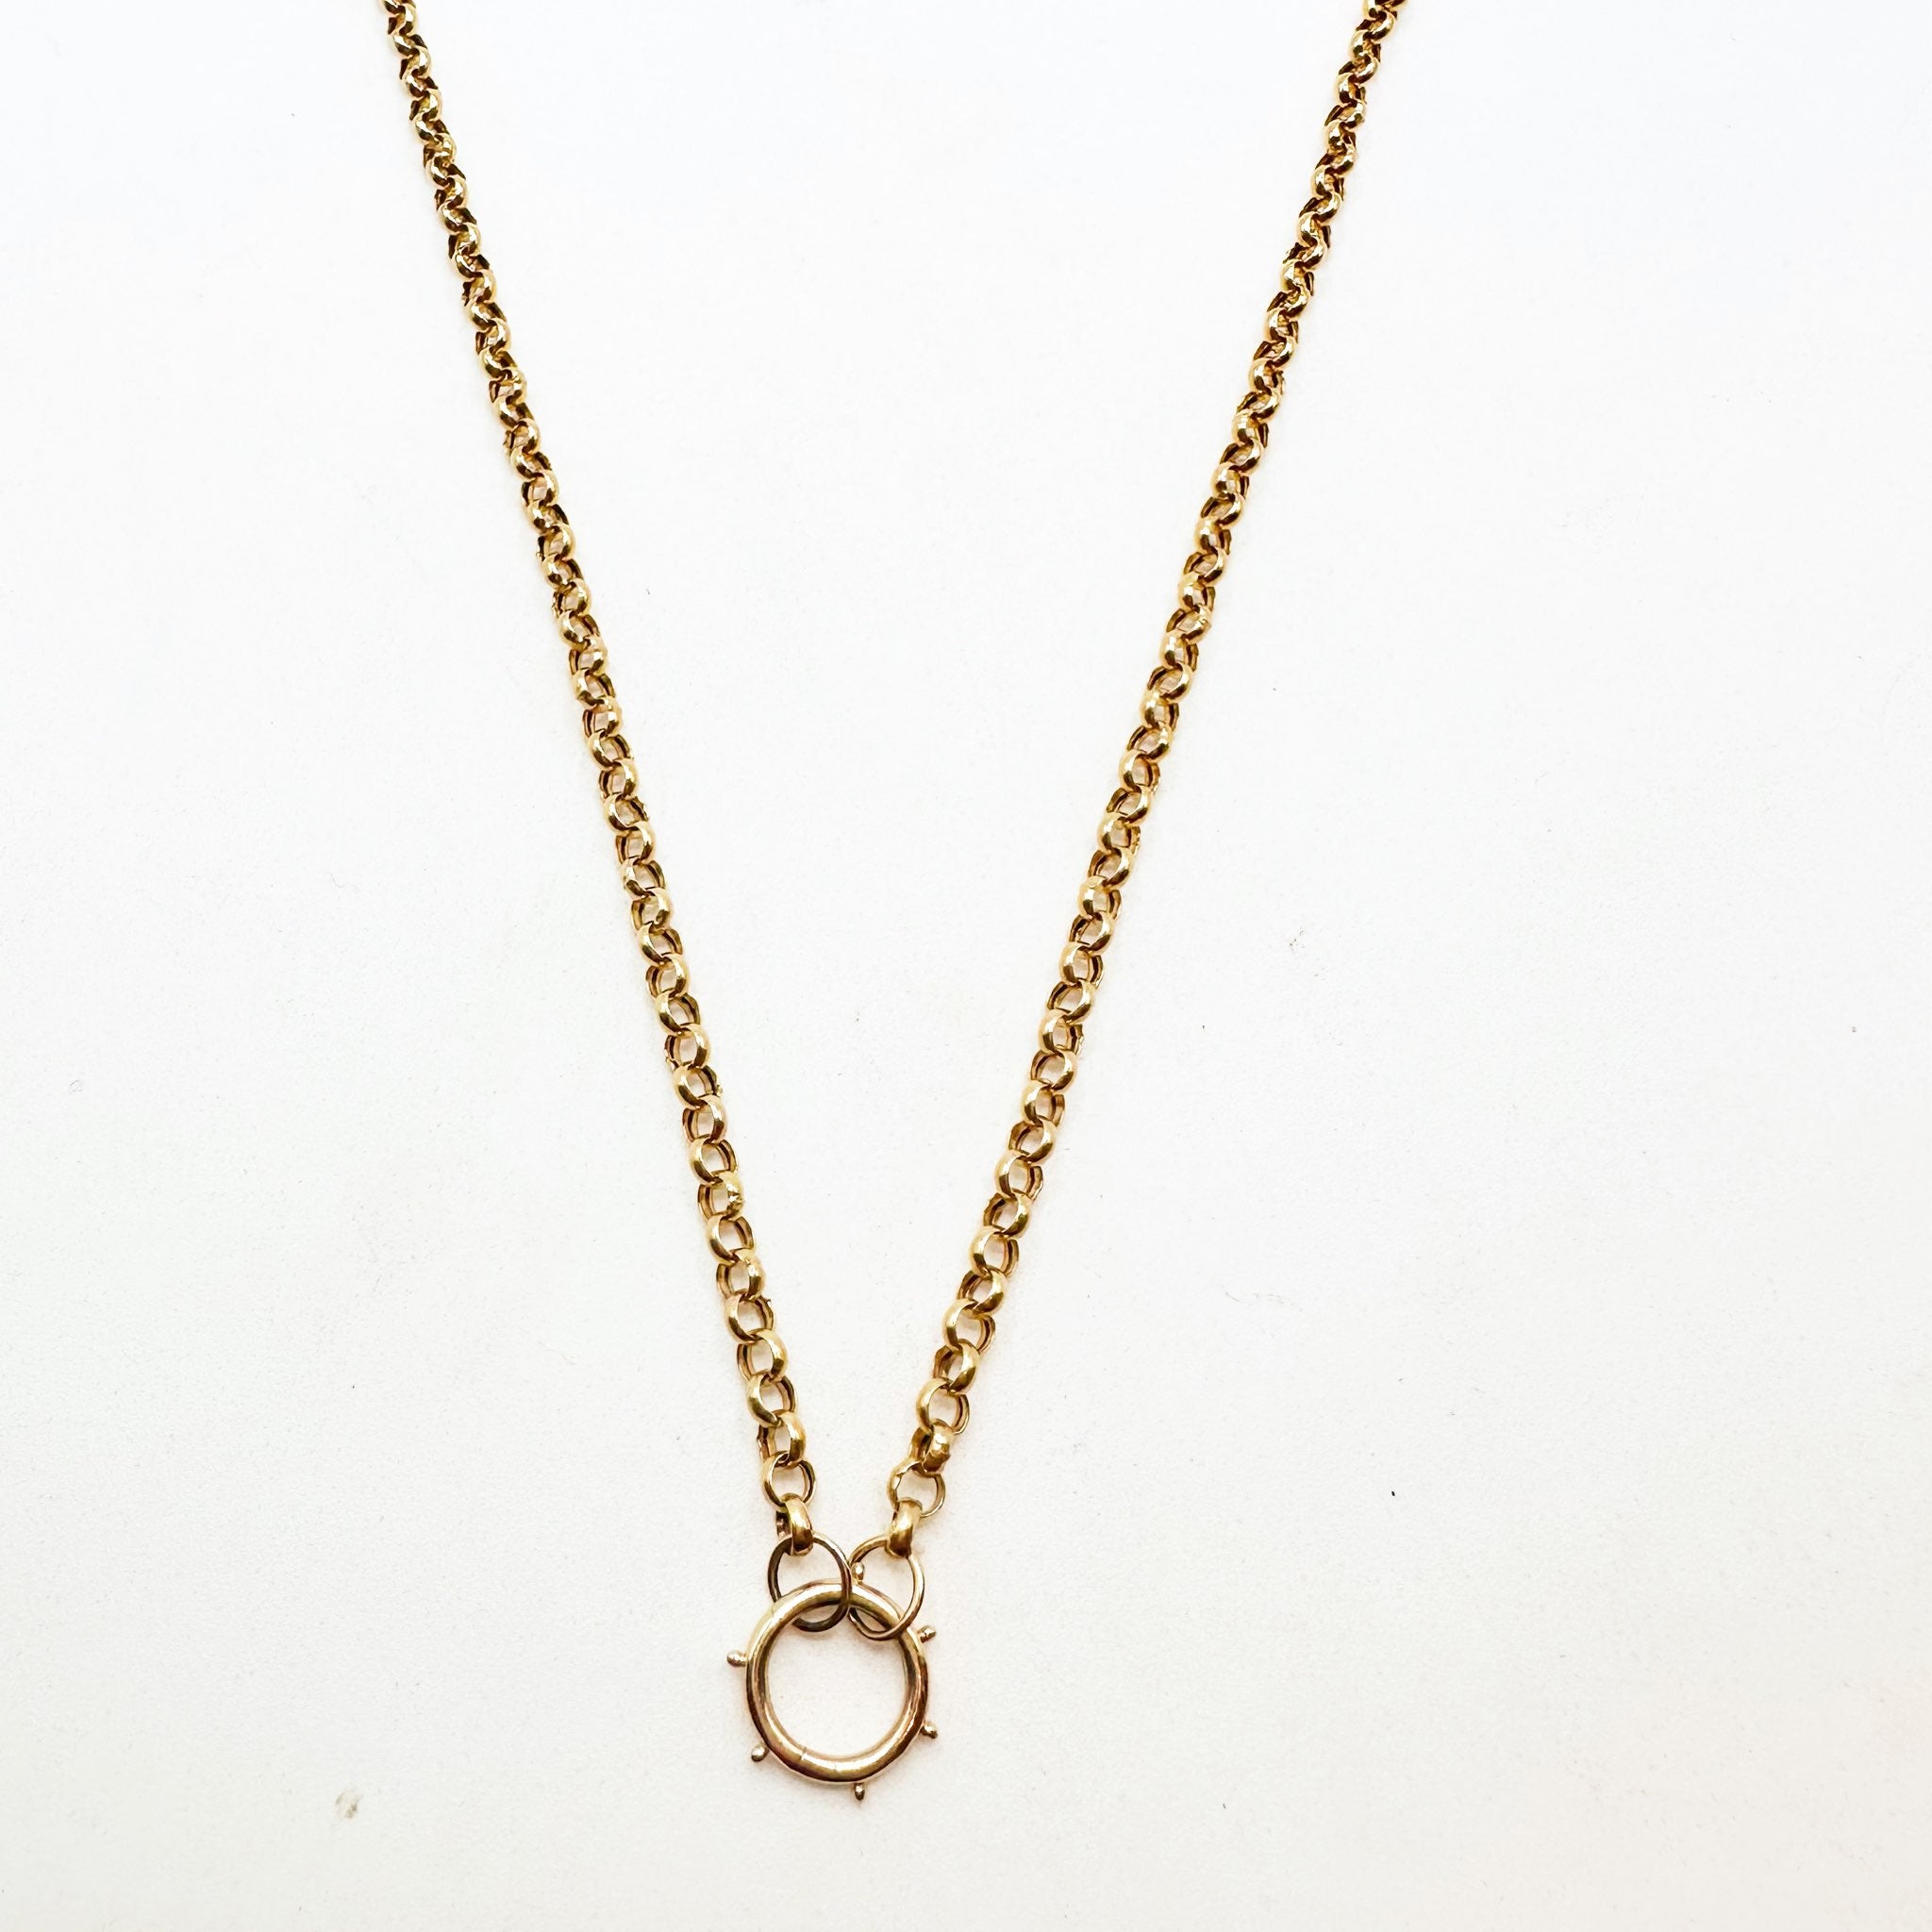 14k GOLD ROLO CHAIN WITH GOLD CHARM HOLDER